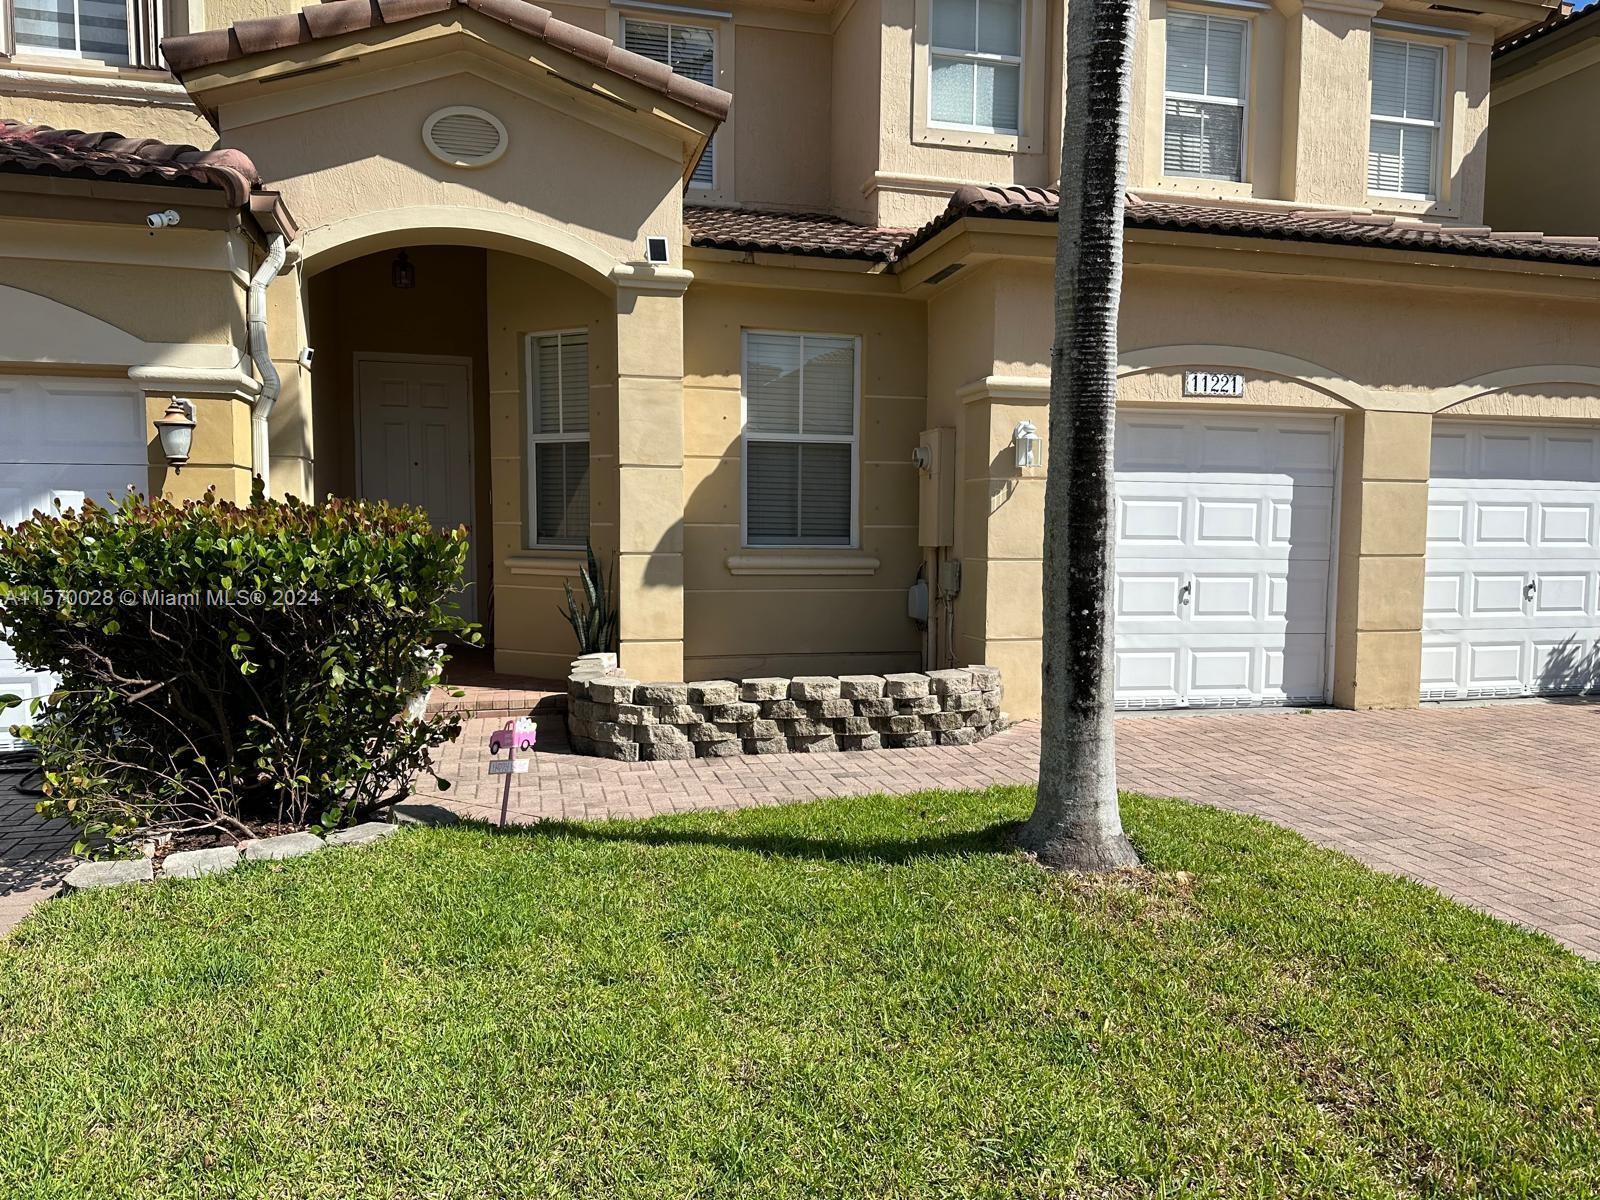 Photo of 11221 NW 75th Ter #11221 in Doral, FL